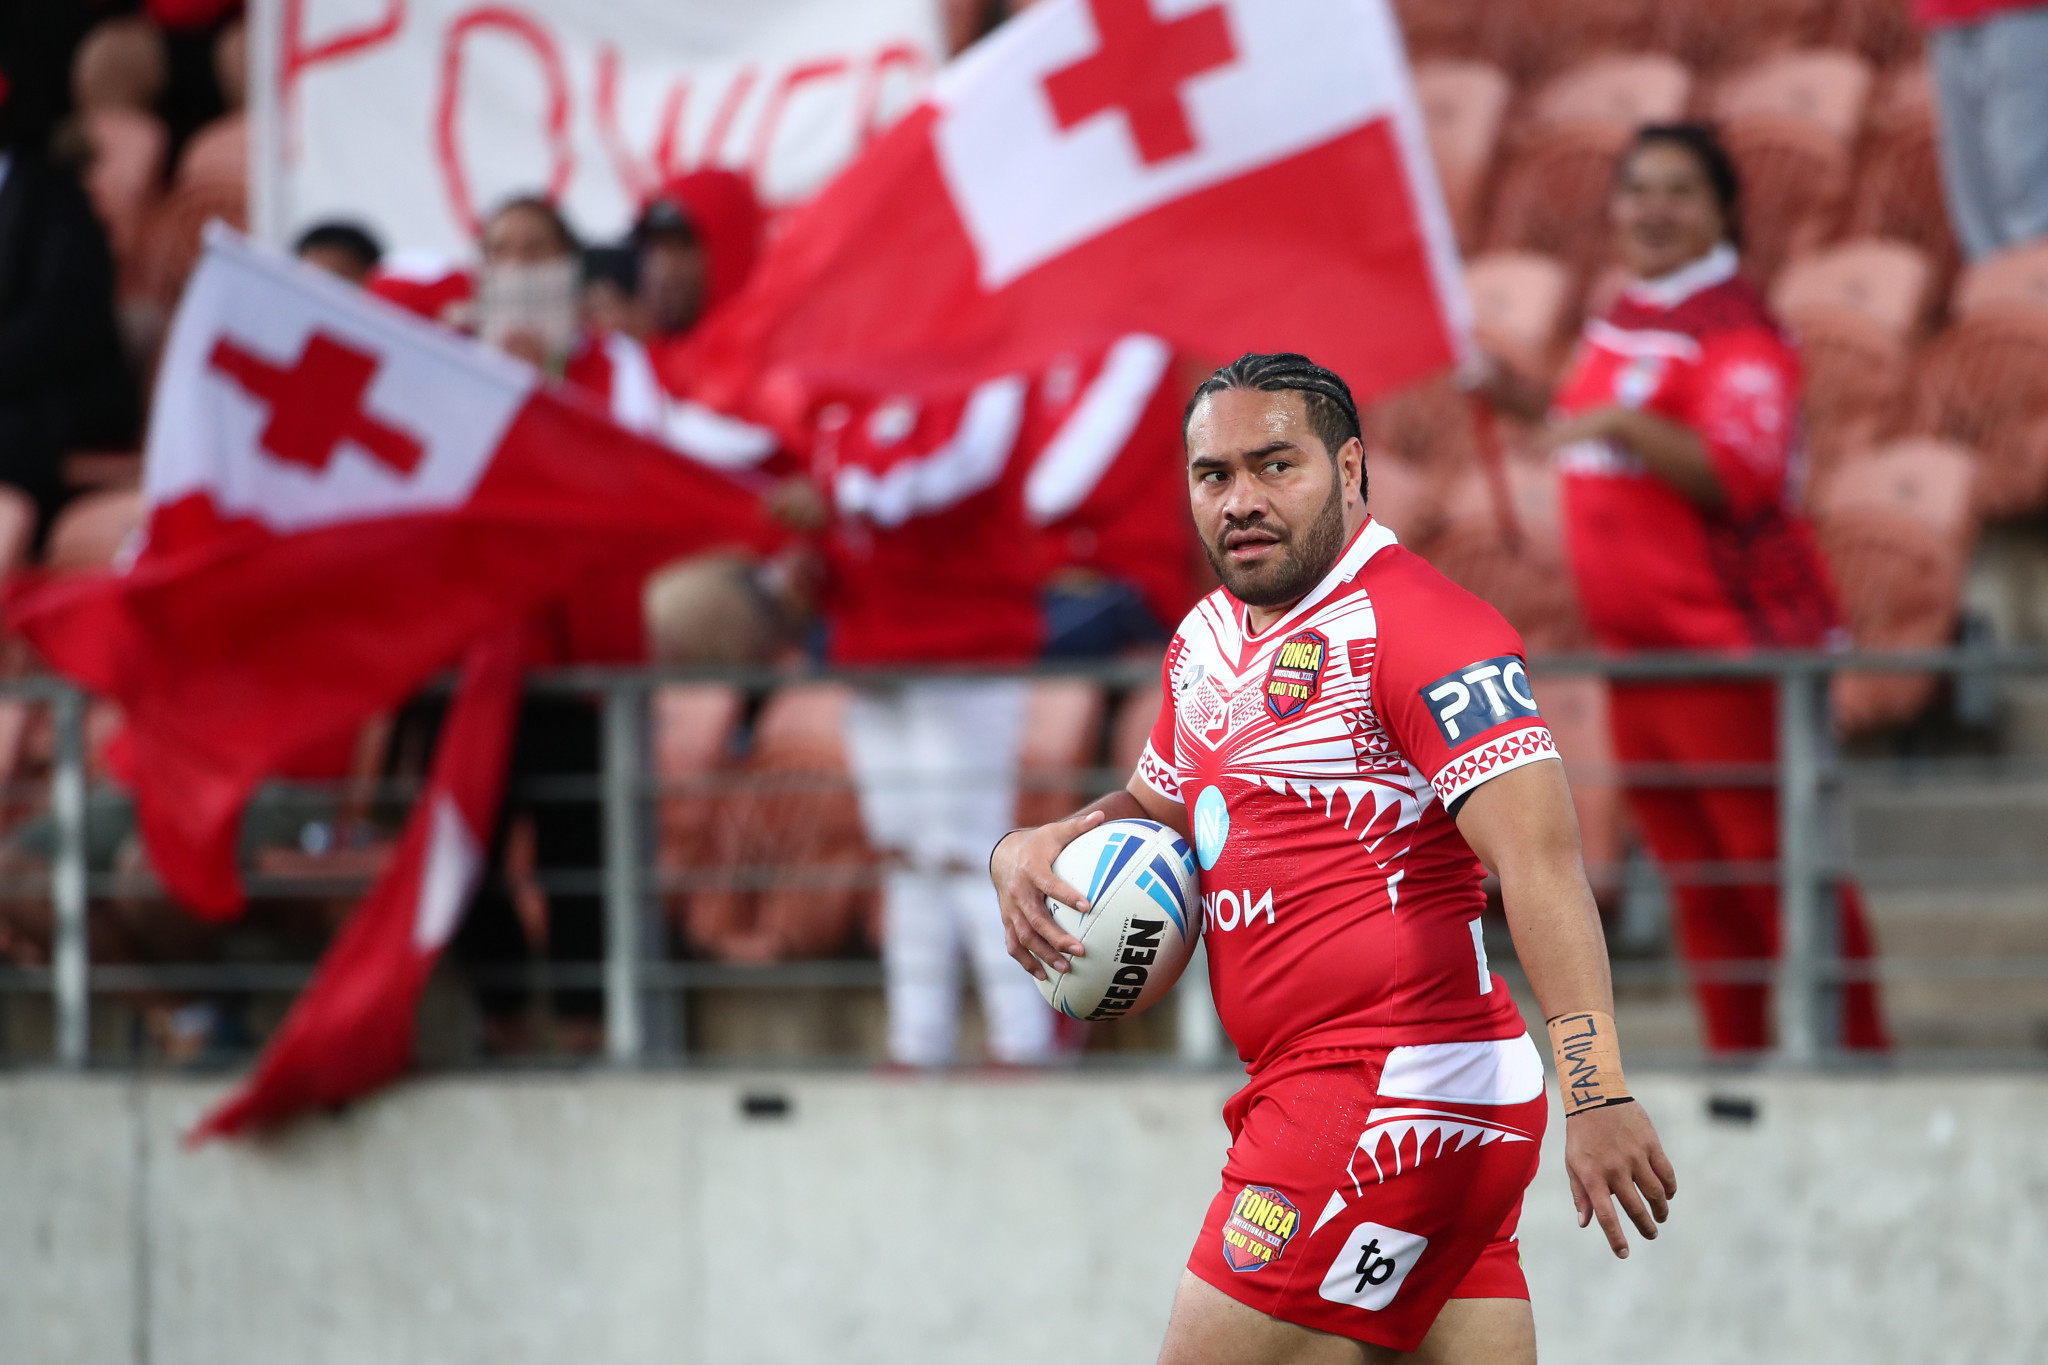 Konrad Hurrell has been included on the implementation committee to represent the Tongan national team ©Getty Images